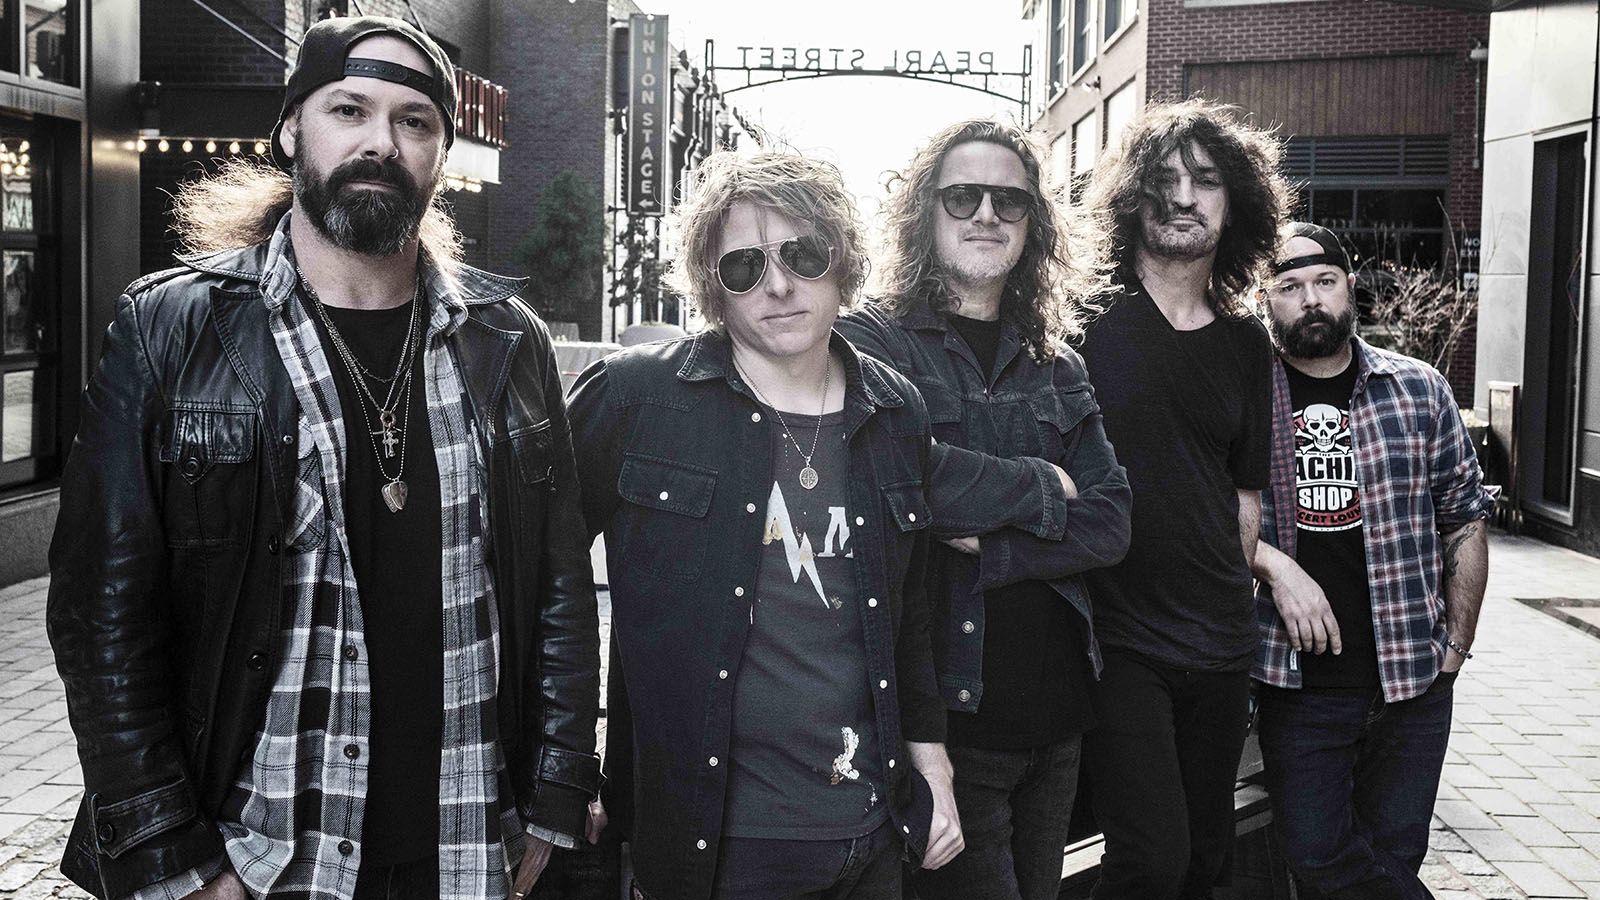 Candlebox will be at Sweetwater Performance Pavilion on Sunday, June 18.